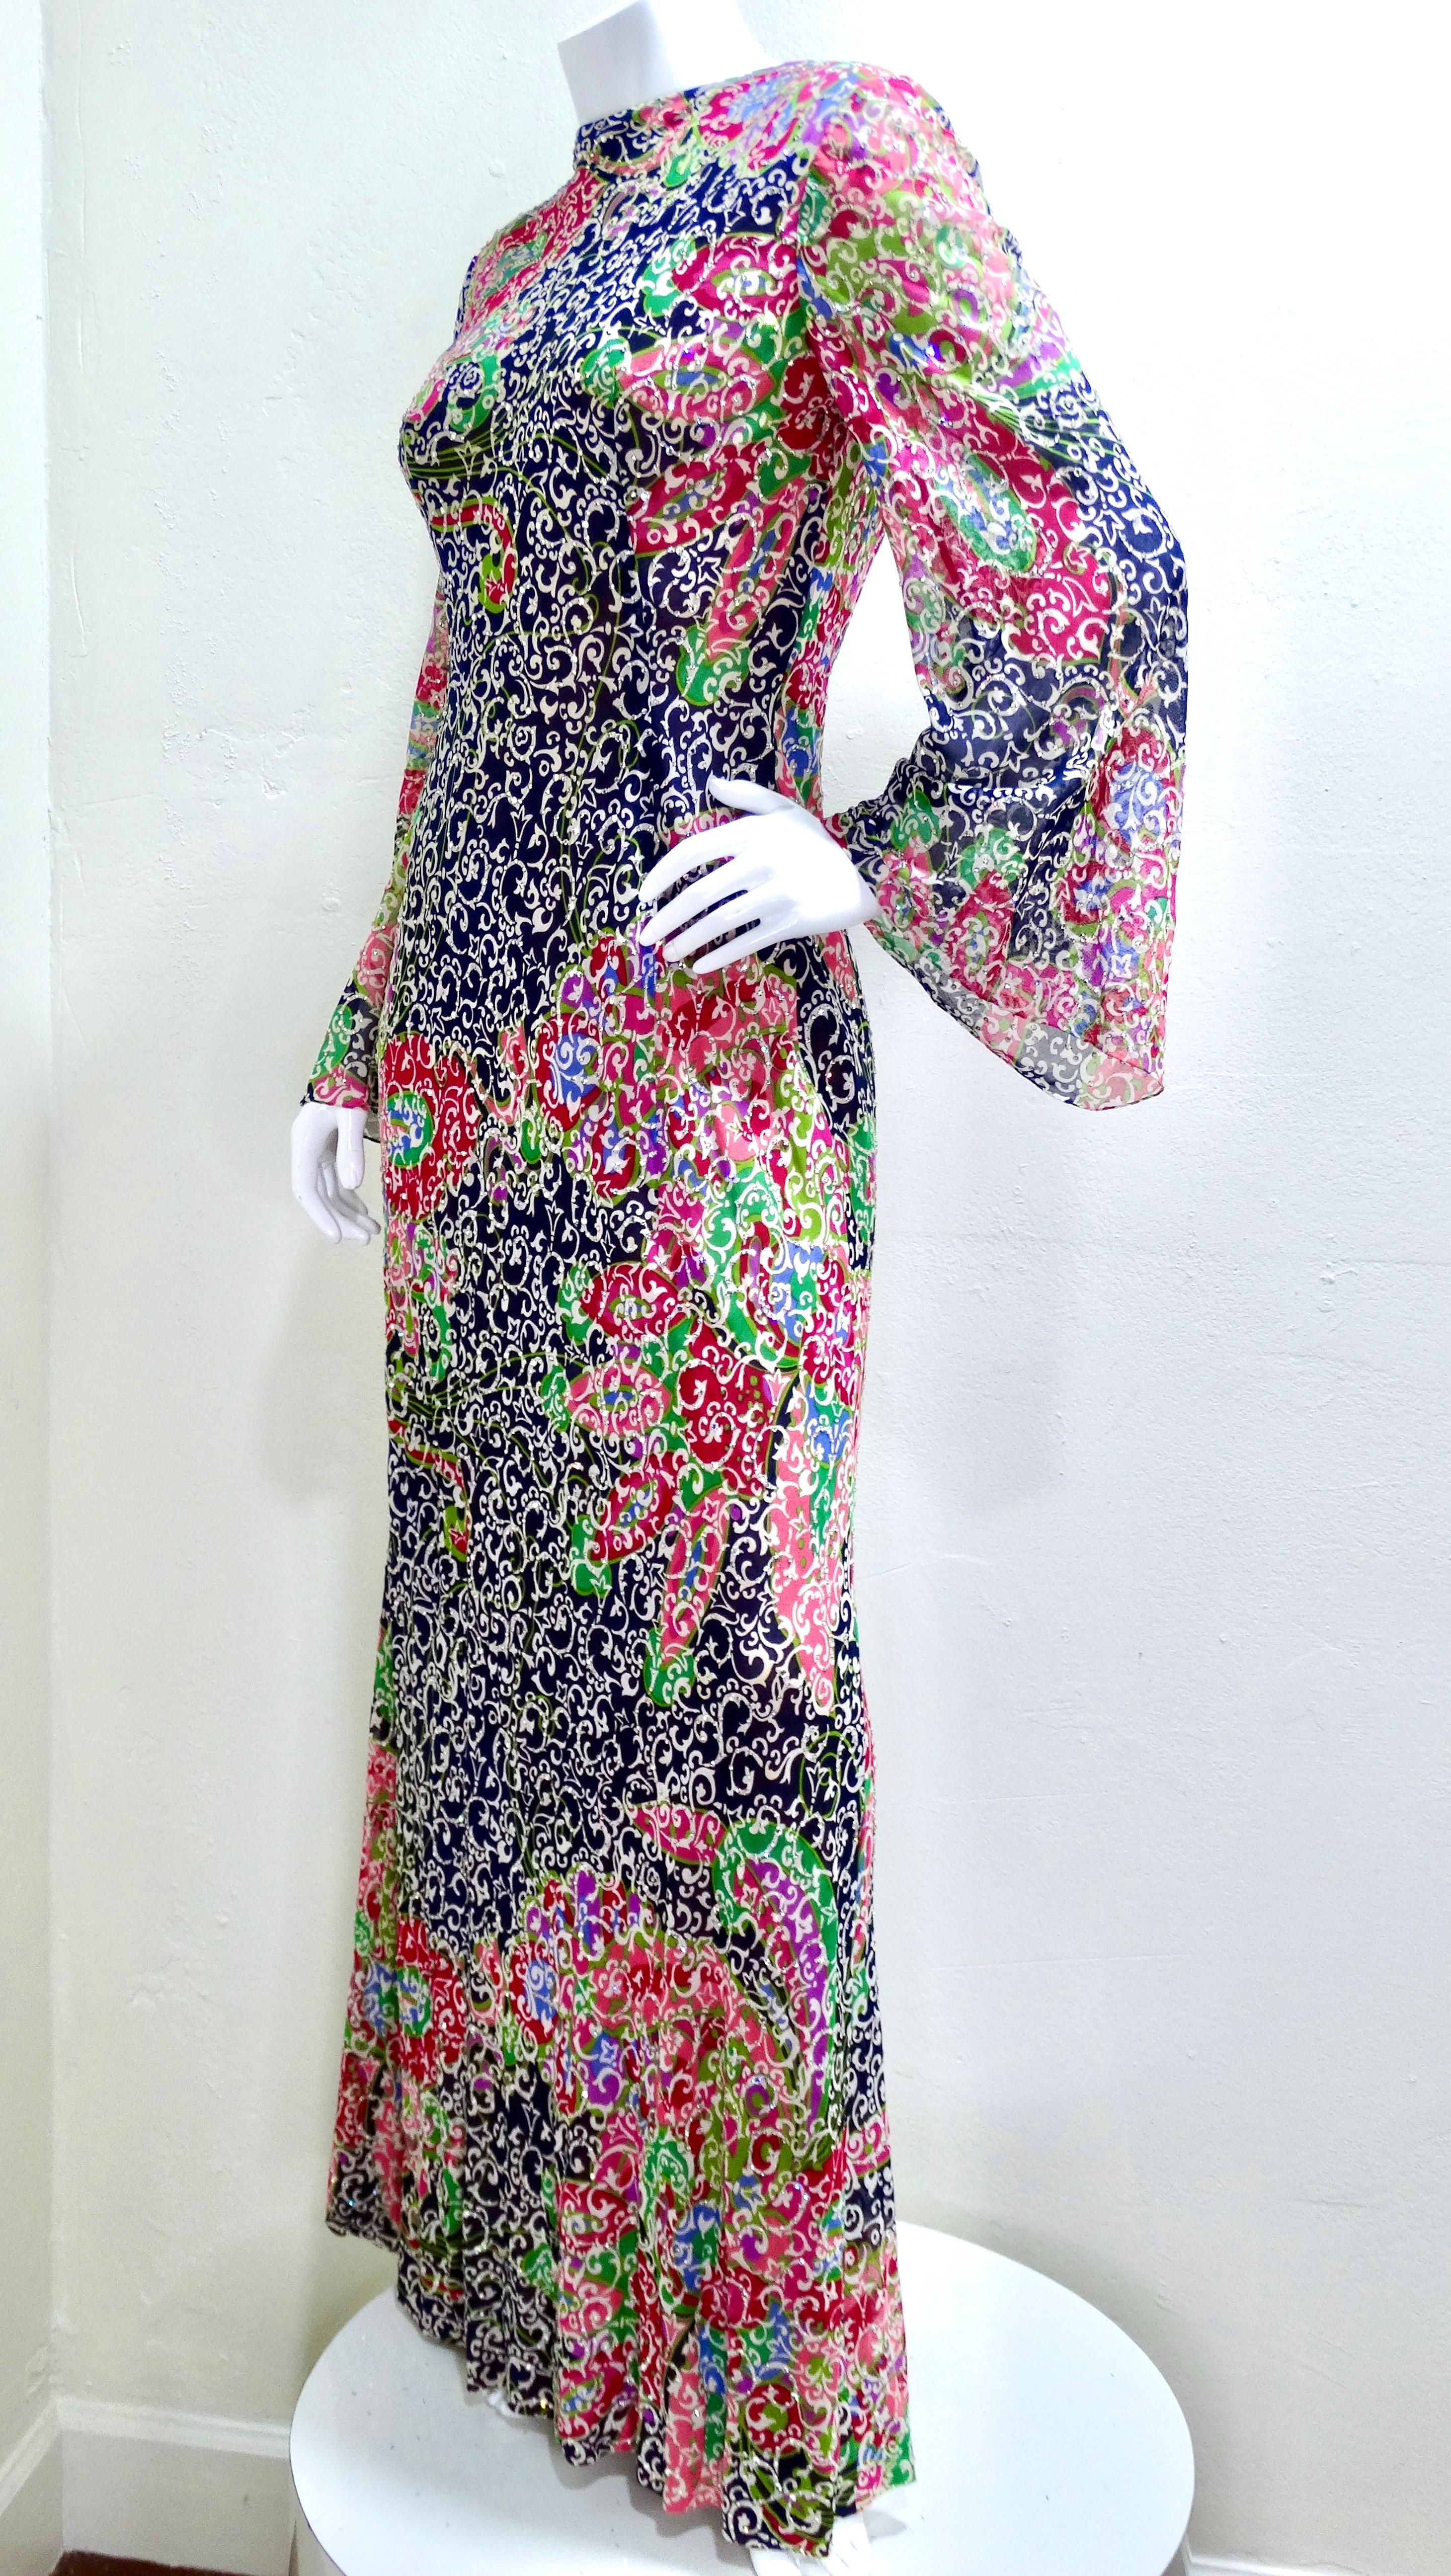 Gray Pauline Trigere Floral Silk Dress Covered in Sequins Circa 70s 